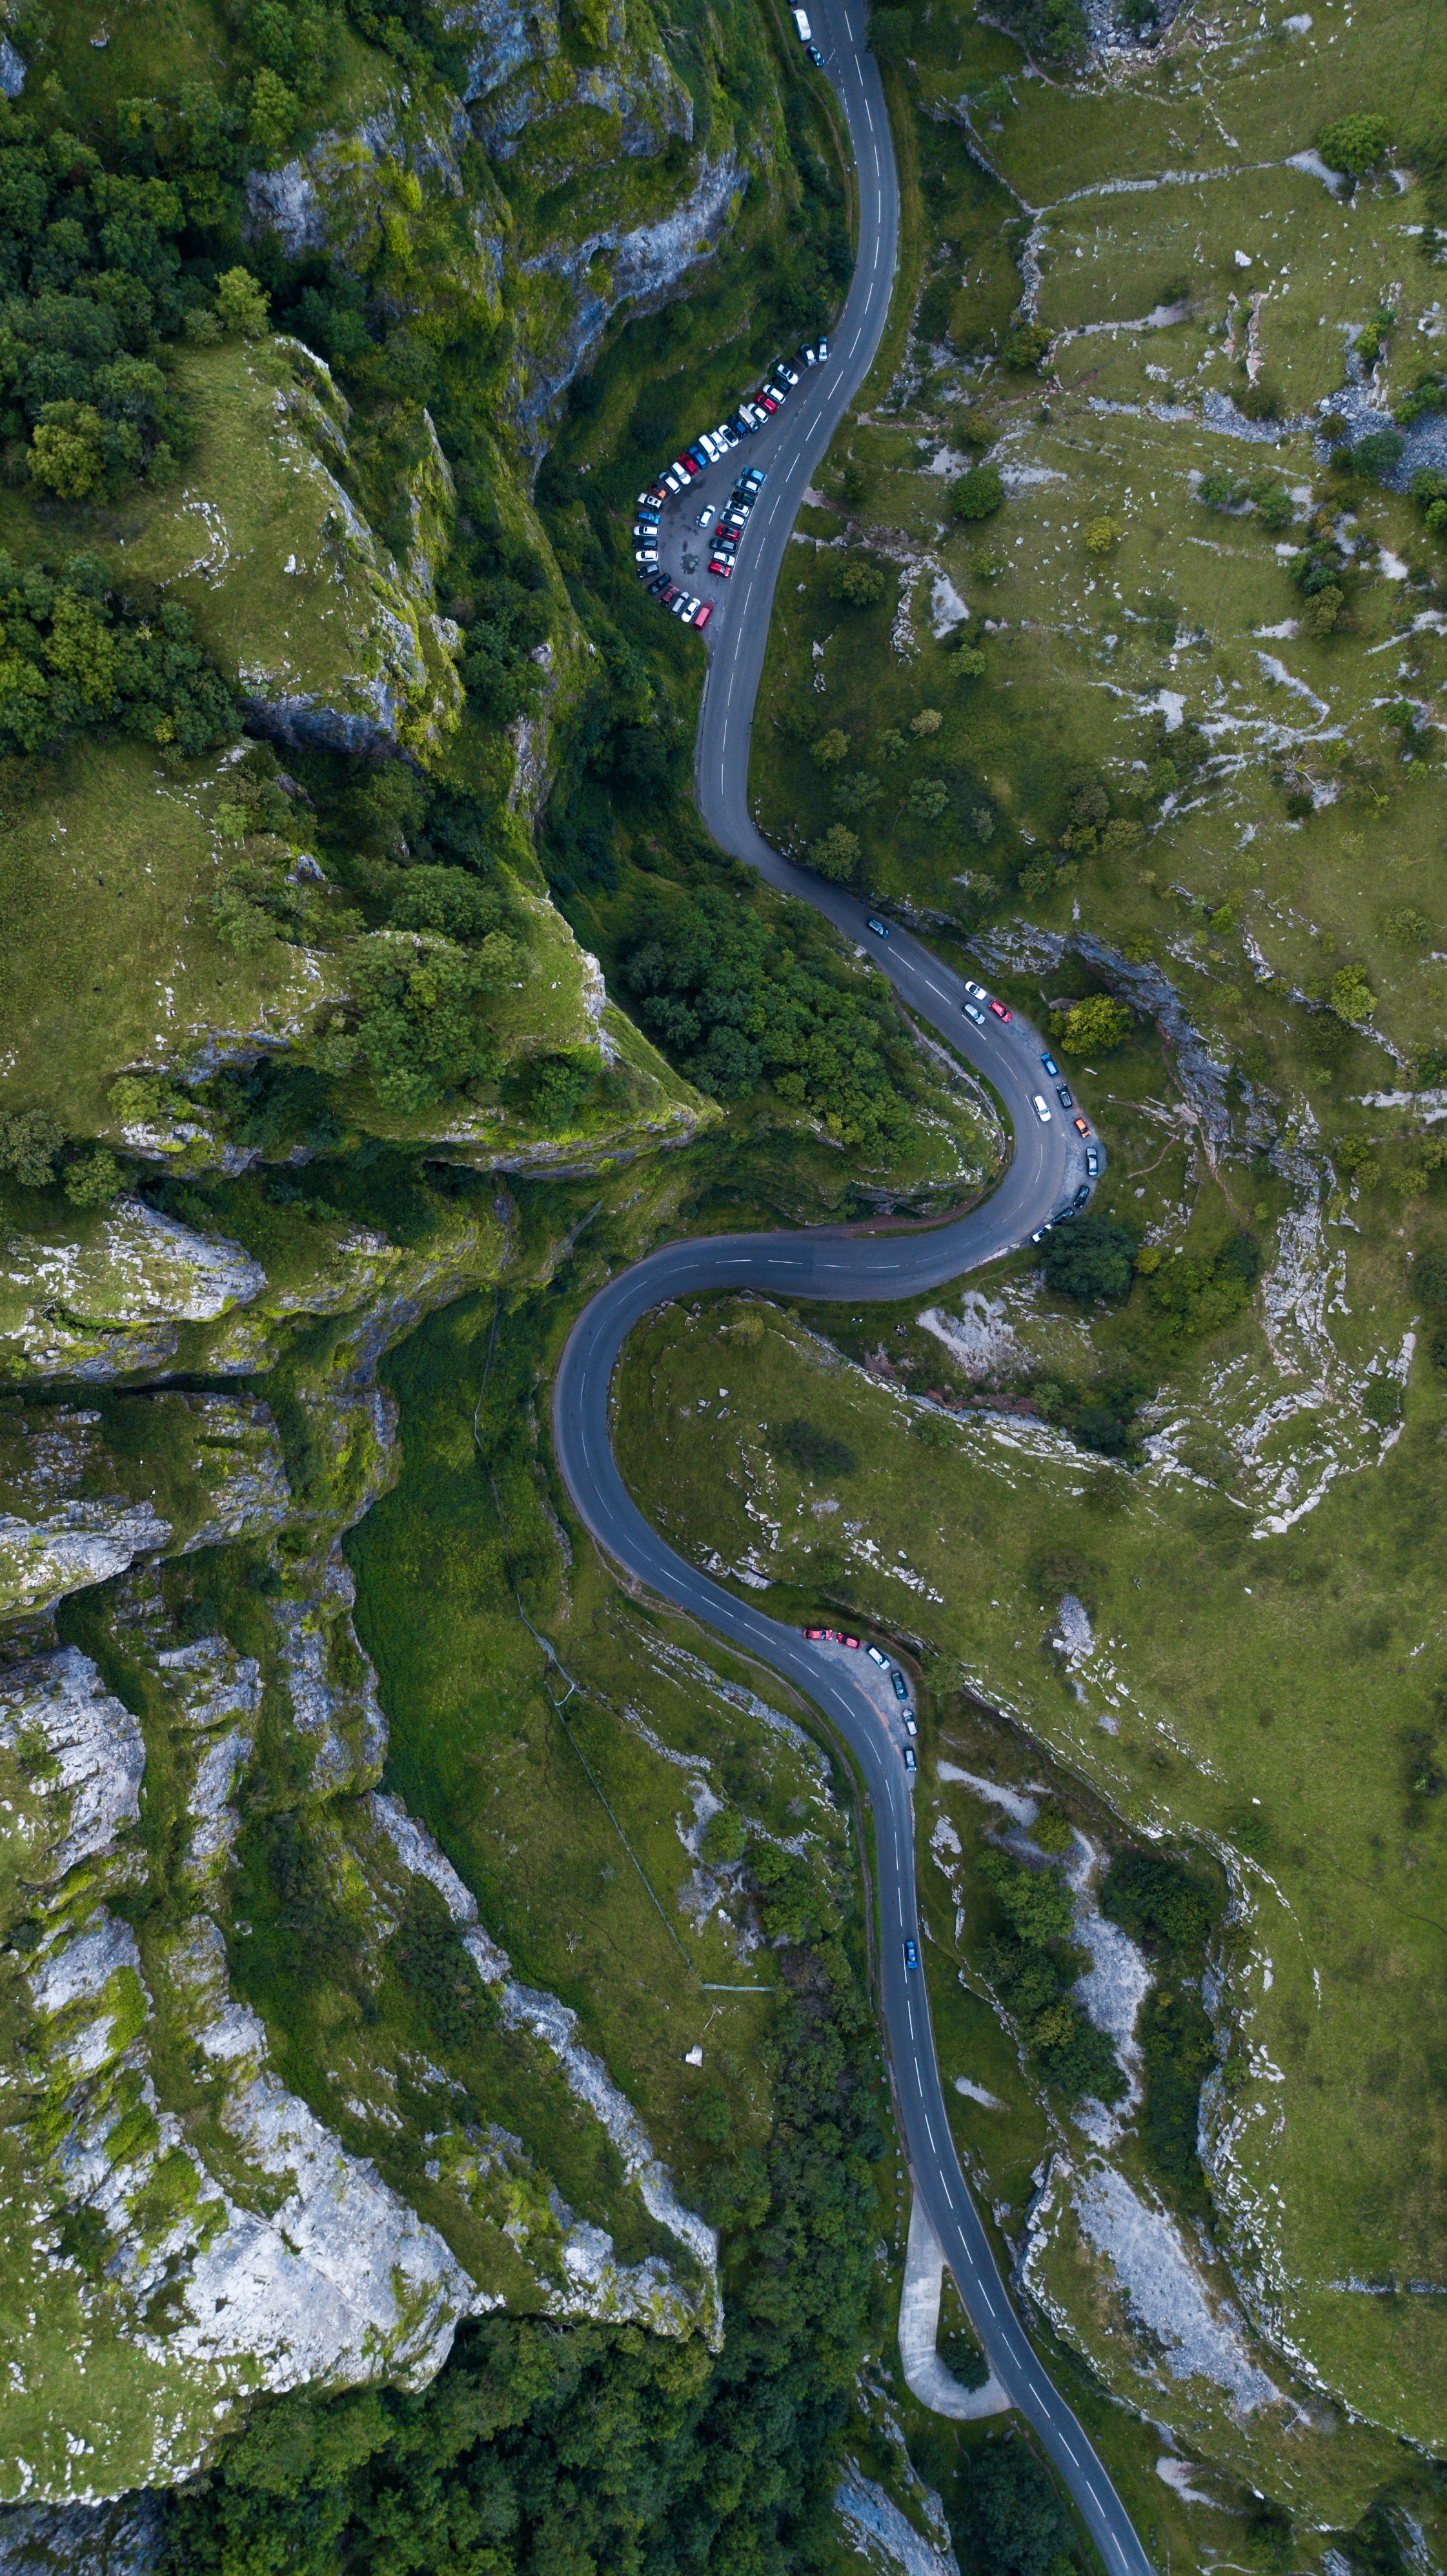 great britain, united kingdom, mountains, nature, cars, view from above, road, winding, sinuous, cheddar